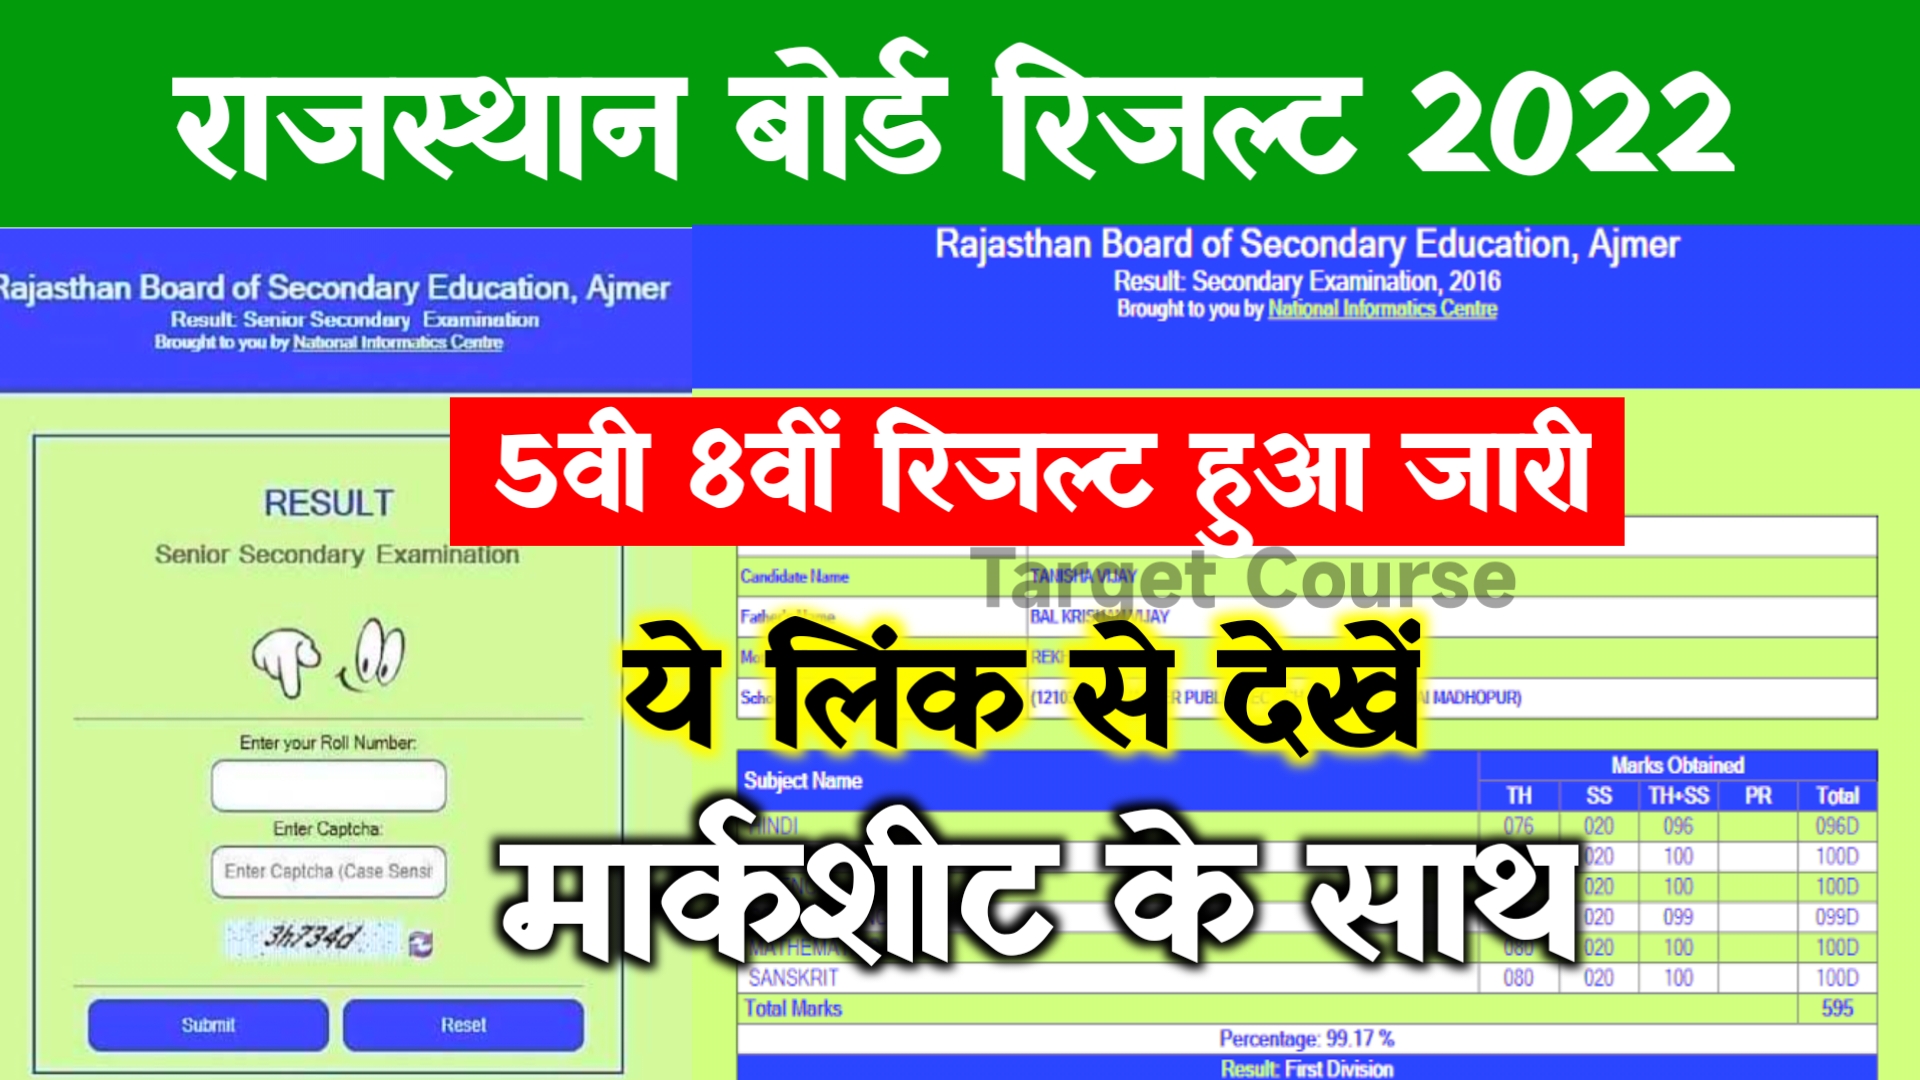 Rajasthan Board 5th & 8th Result 2022 Link ~ Check@rajresults.nic.in